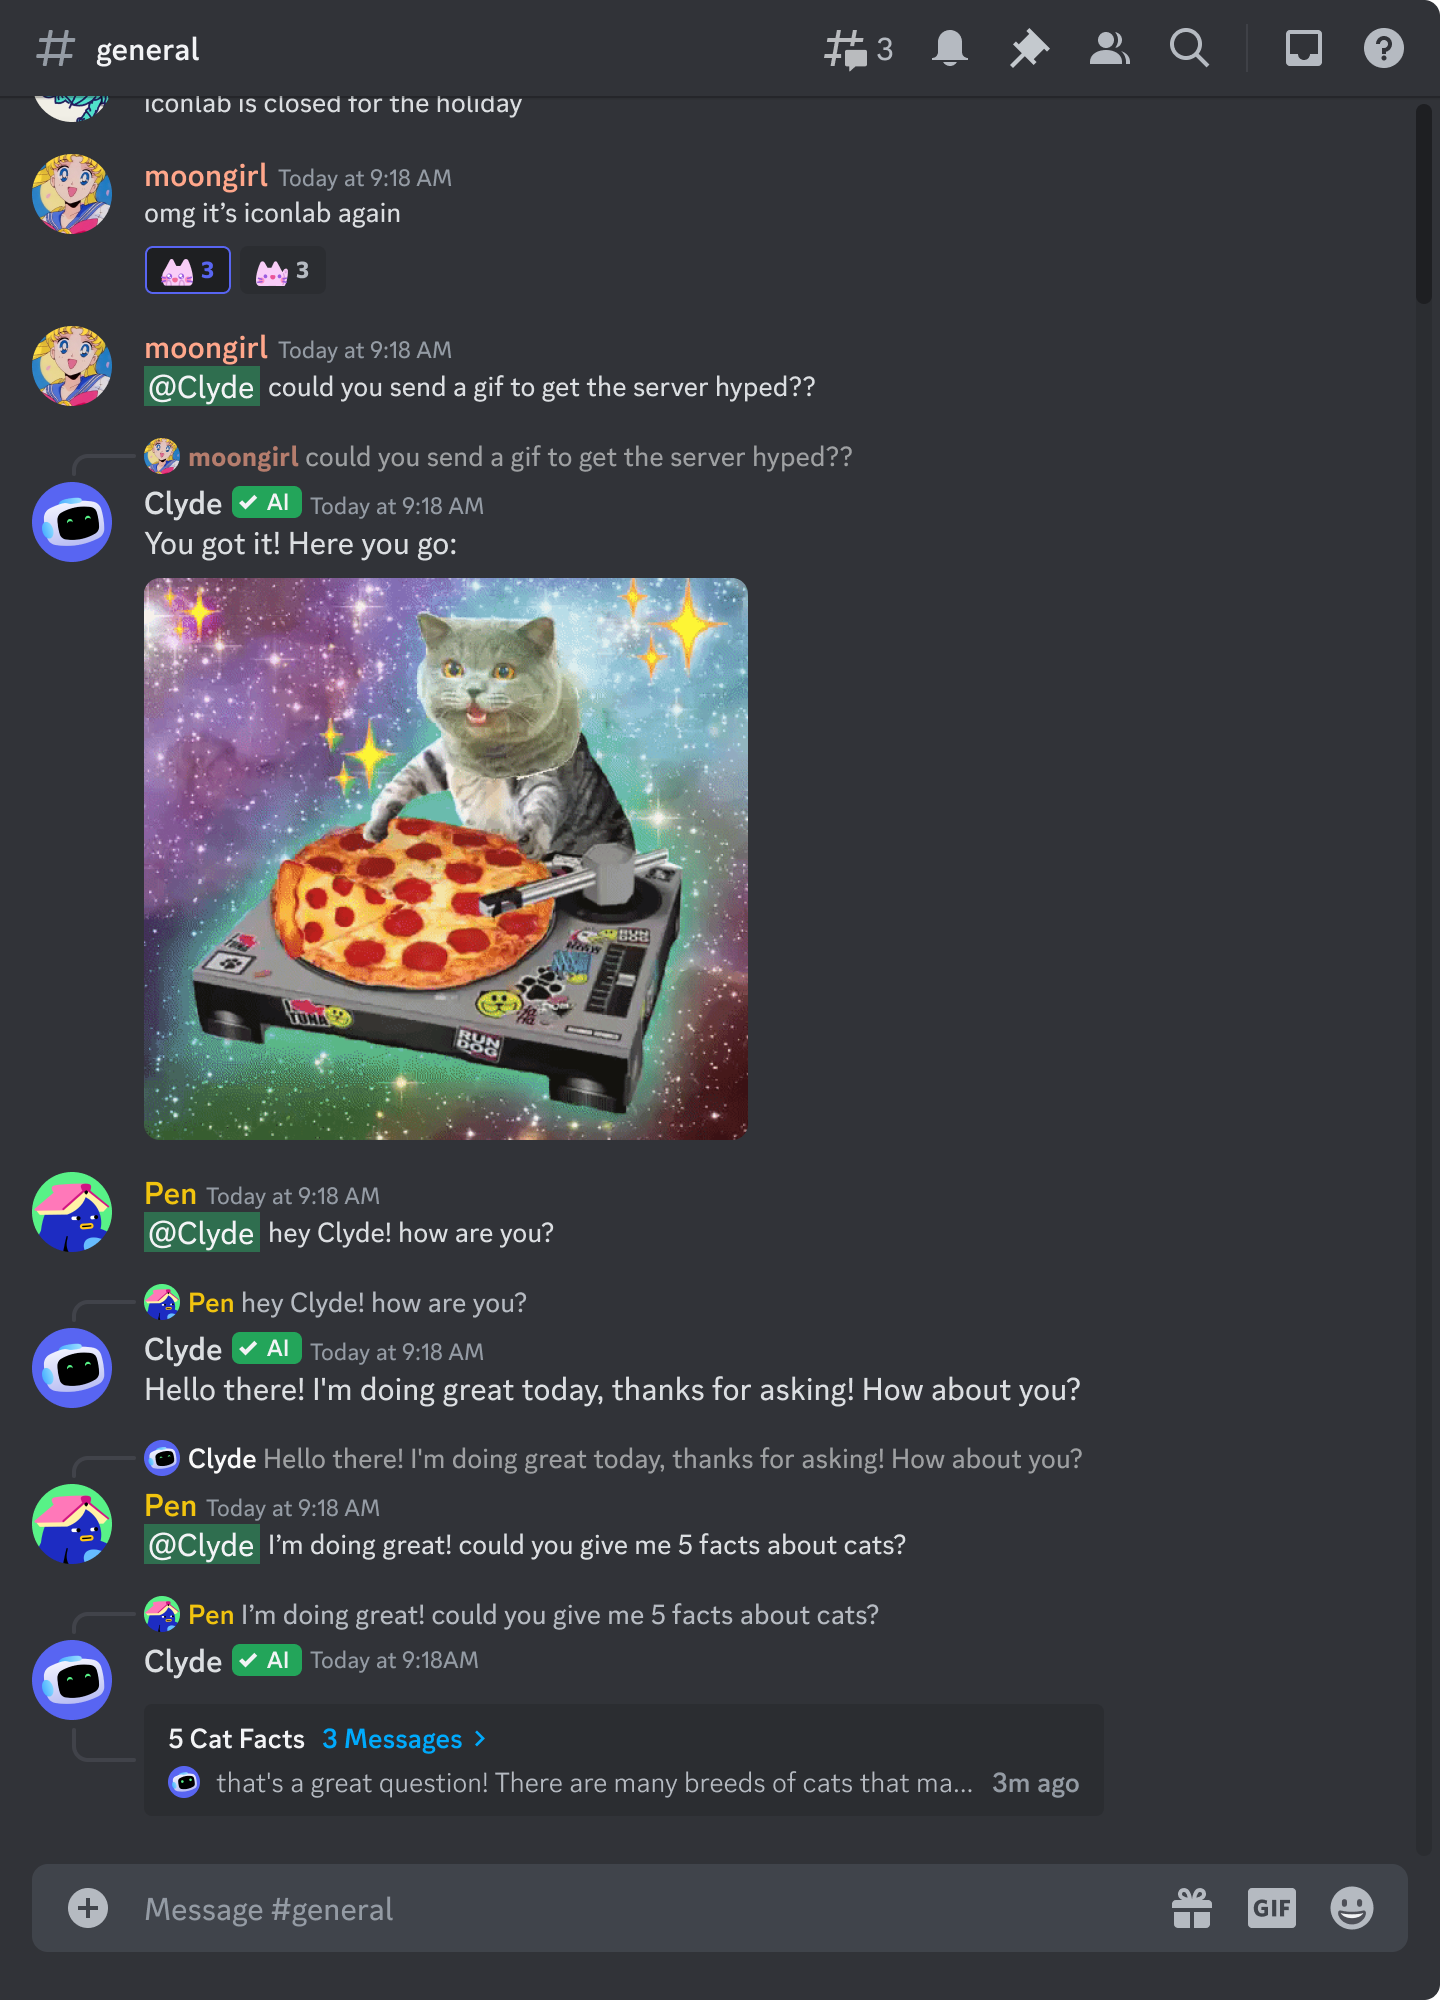 Discord users Pen and Moongirl are seen utilising Clyde AI in the #general chat. Moongirl ask Clyde to show them a GIF, and then Pen asks Clyde how he's feeling on that day and proceeds to ask for 5 facts about cats!